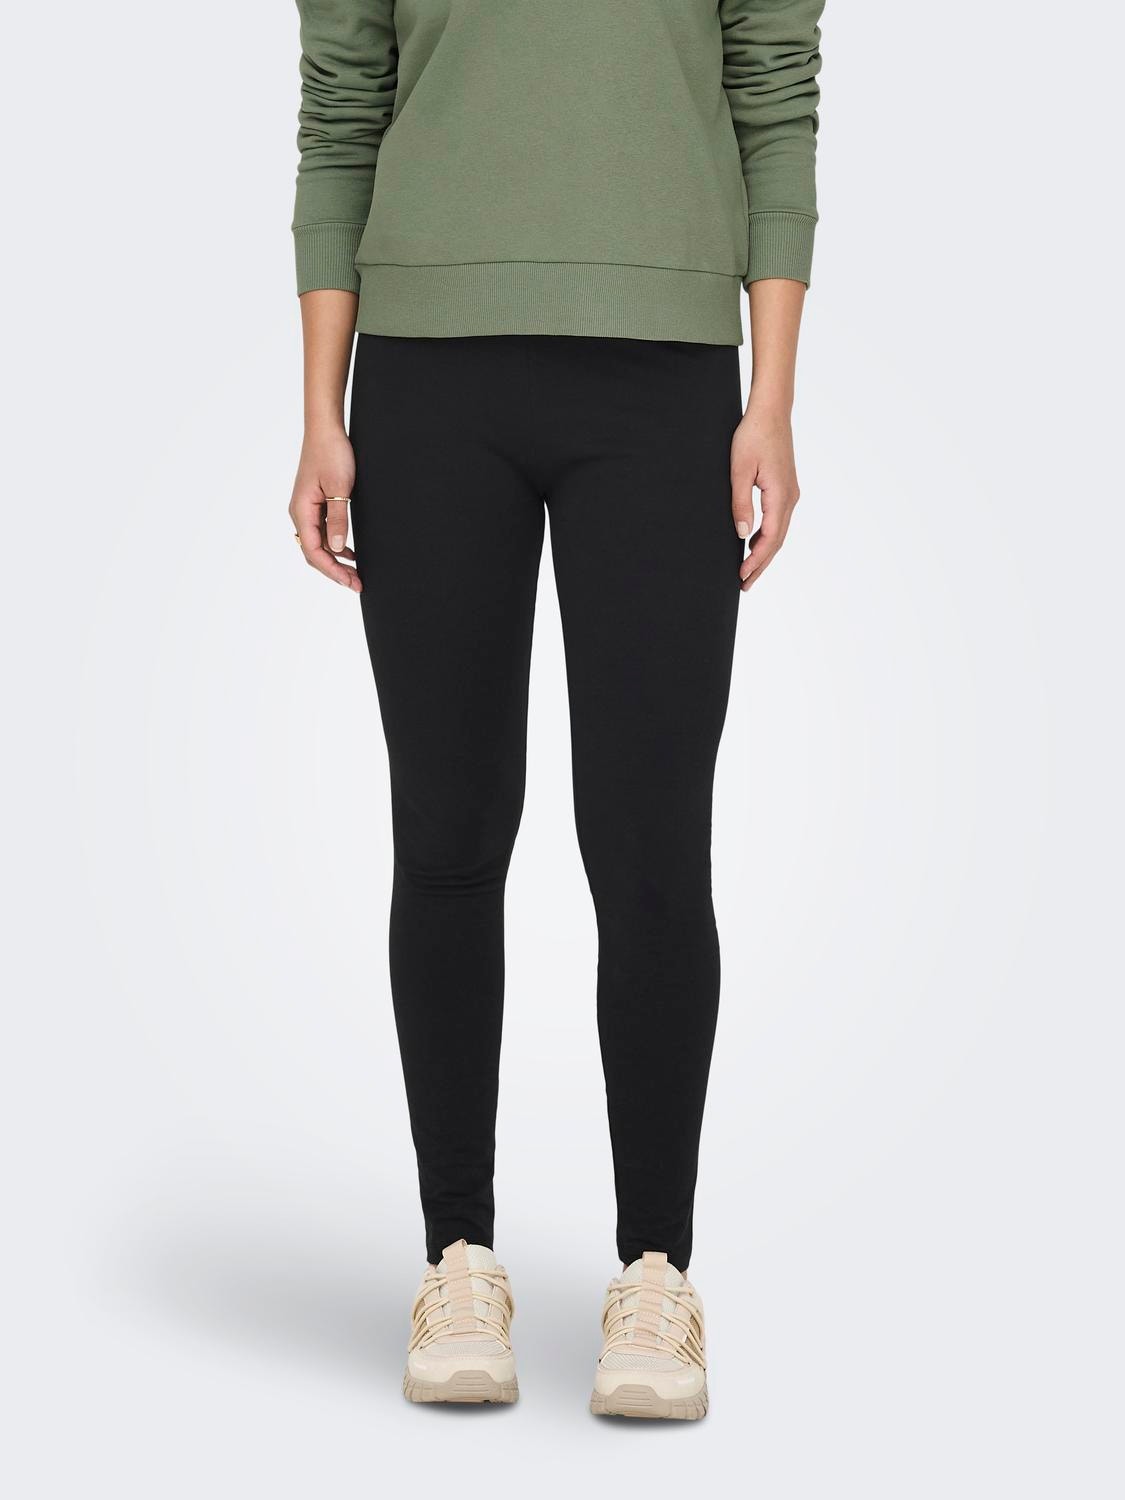 ONLY Leggings Tight Fit Taille moyenne -Black - 15300690